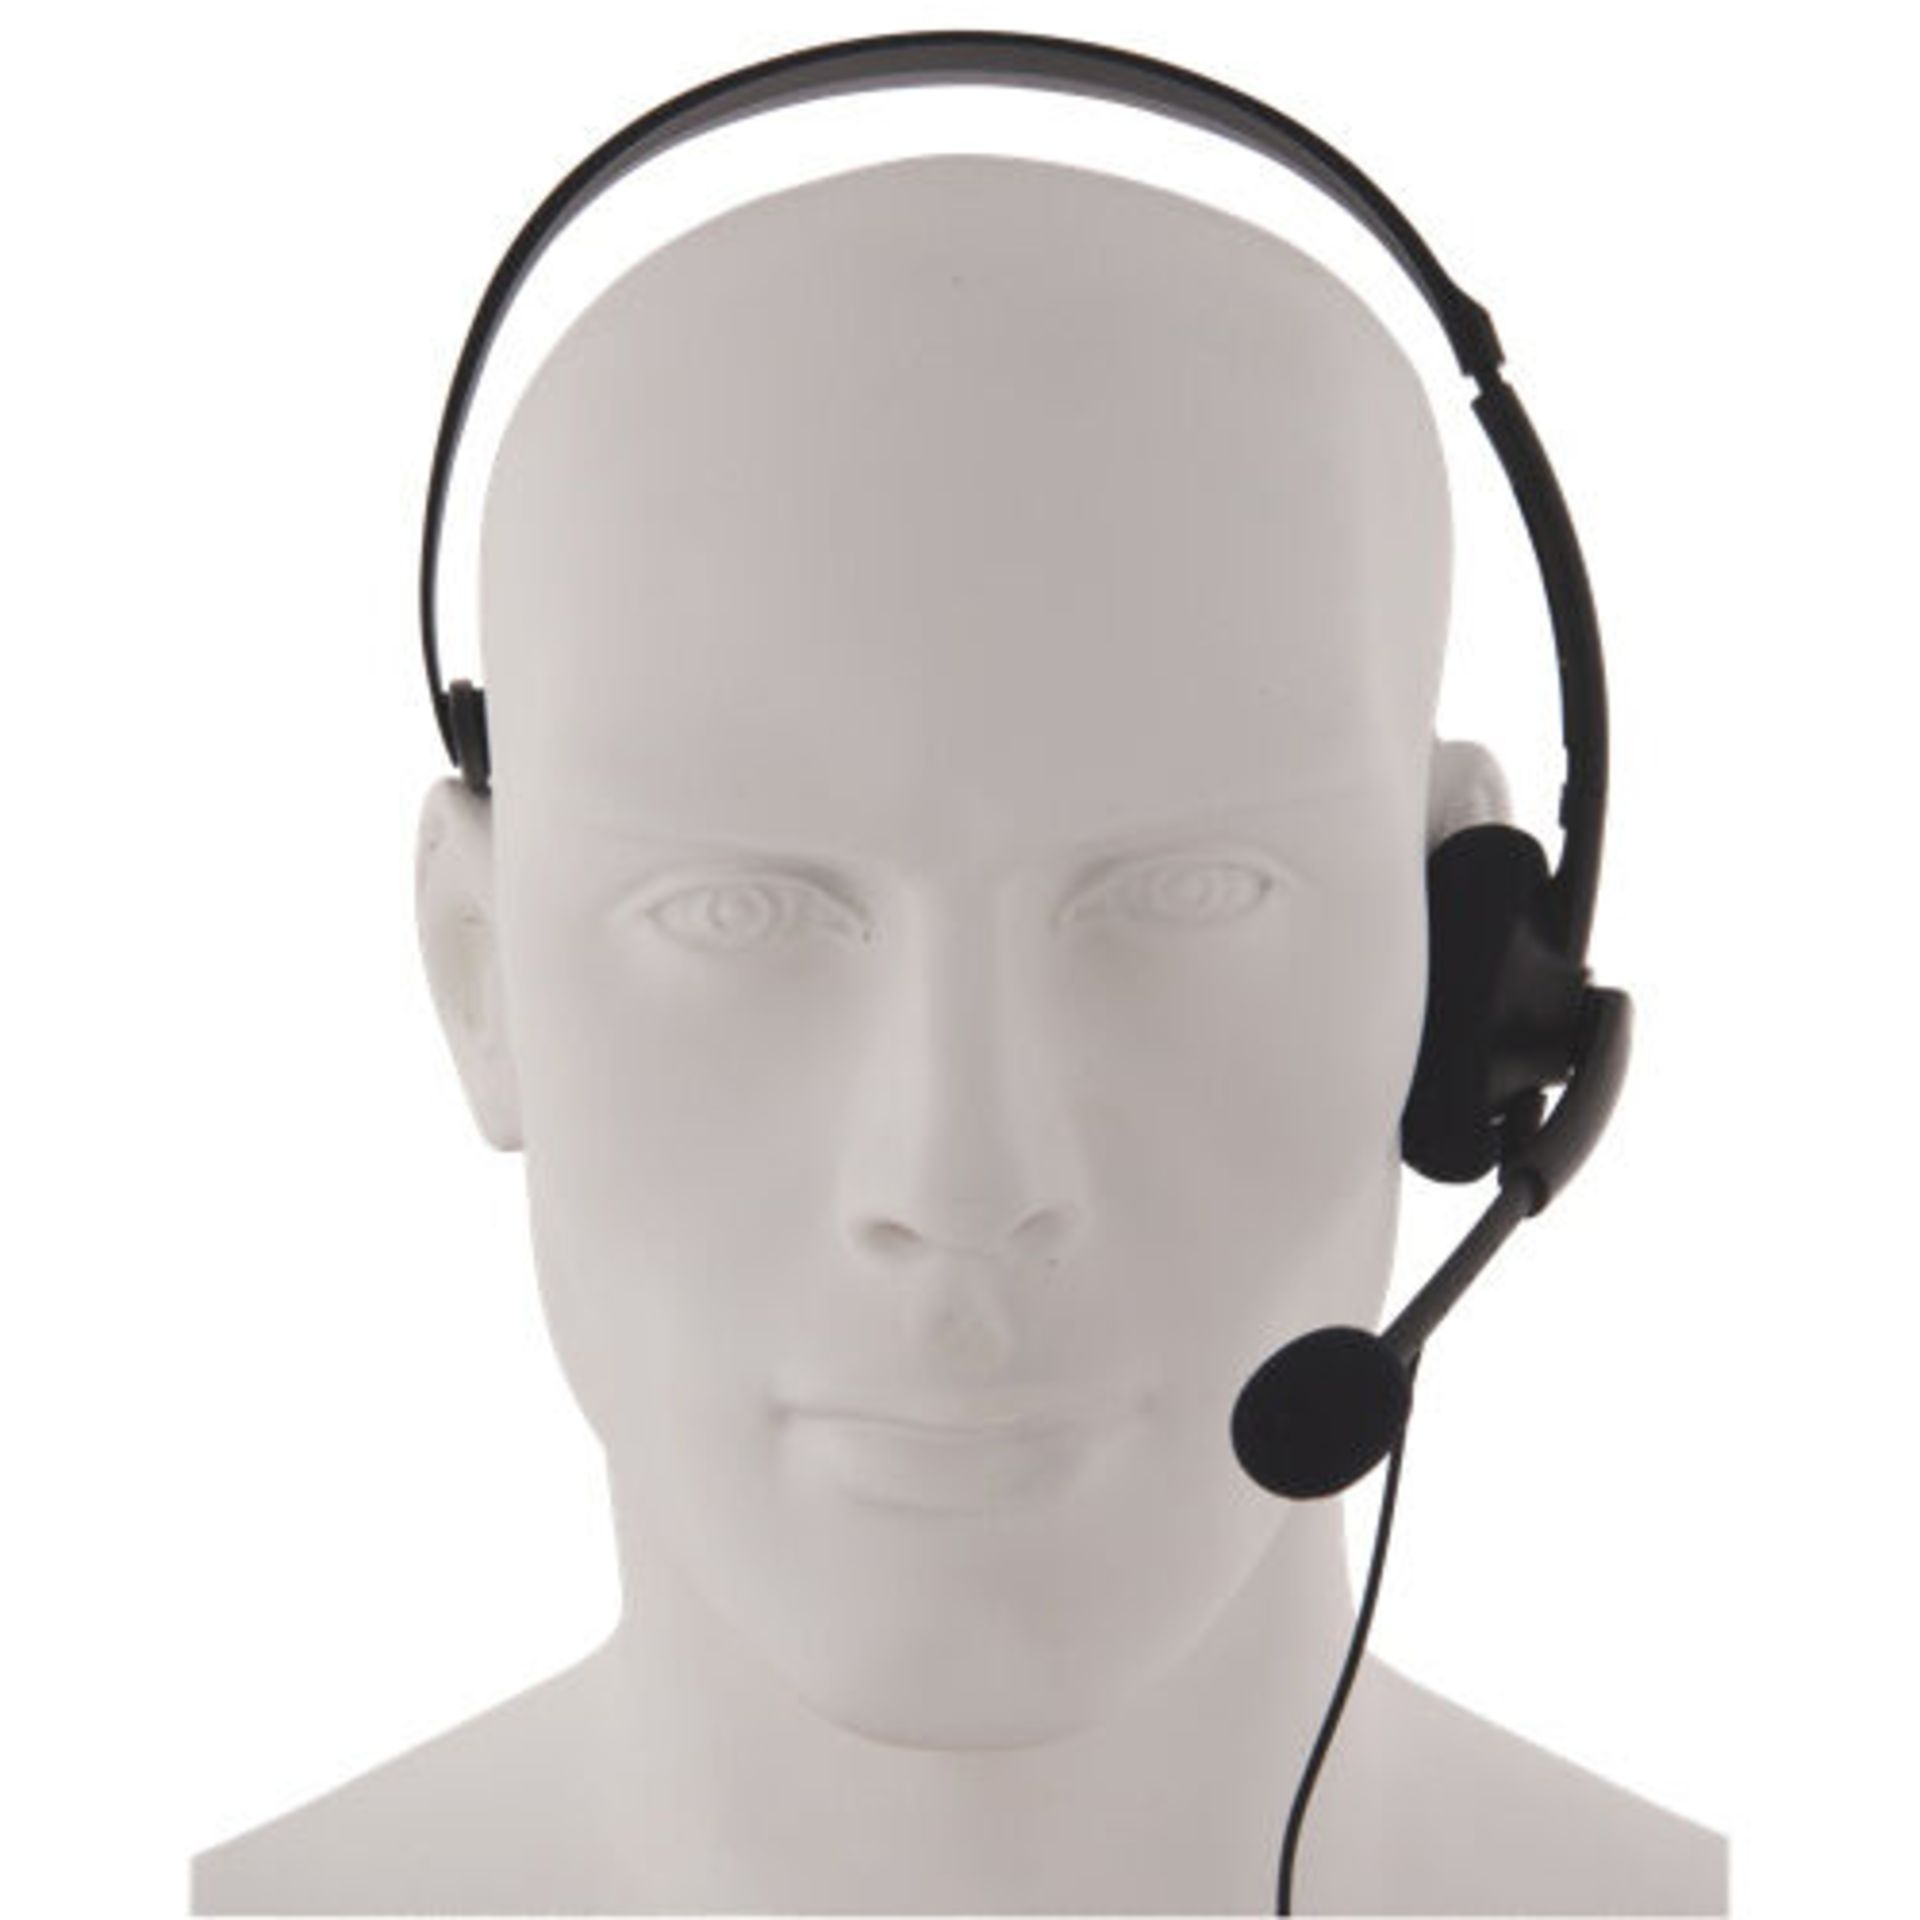 500 X OFFICIAL XBOX 360 NEW LIVE ONLINE CHAT HEADSET WITH MIC GAMING HEADPHONES 2.5MM AUX - Image 2 of 5